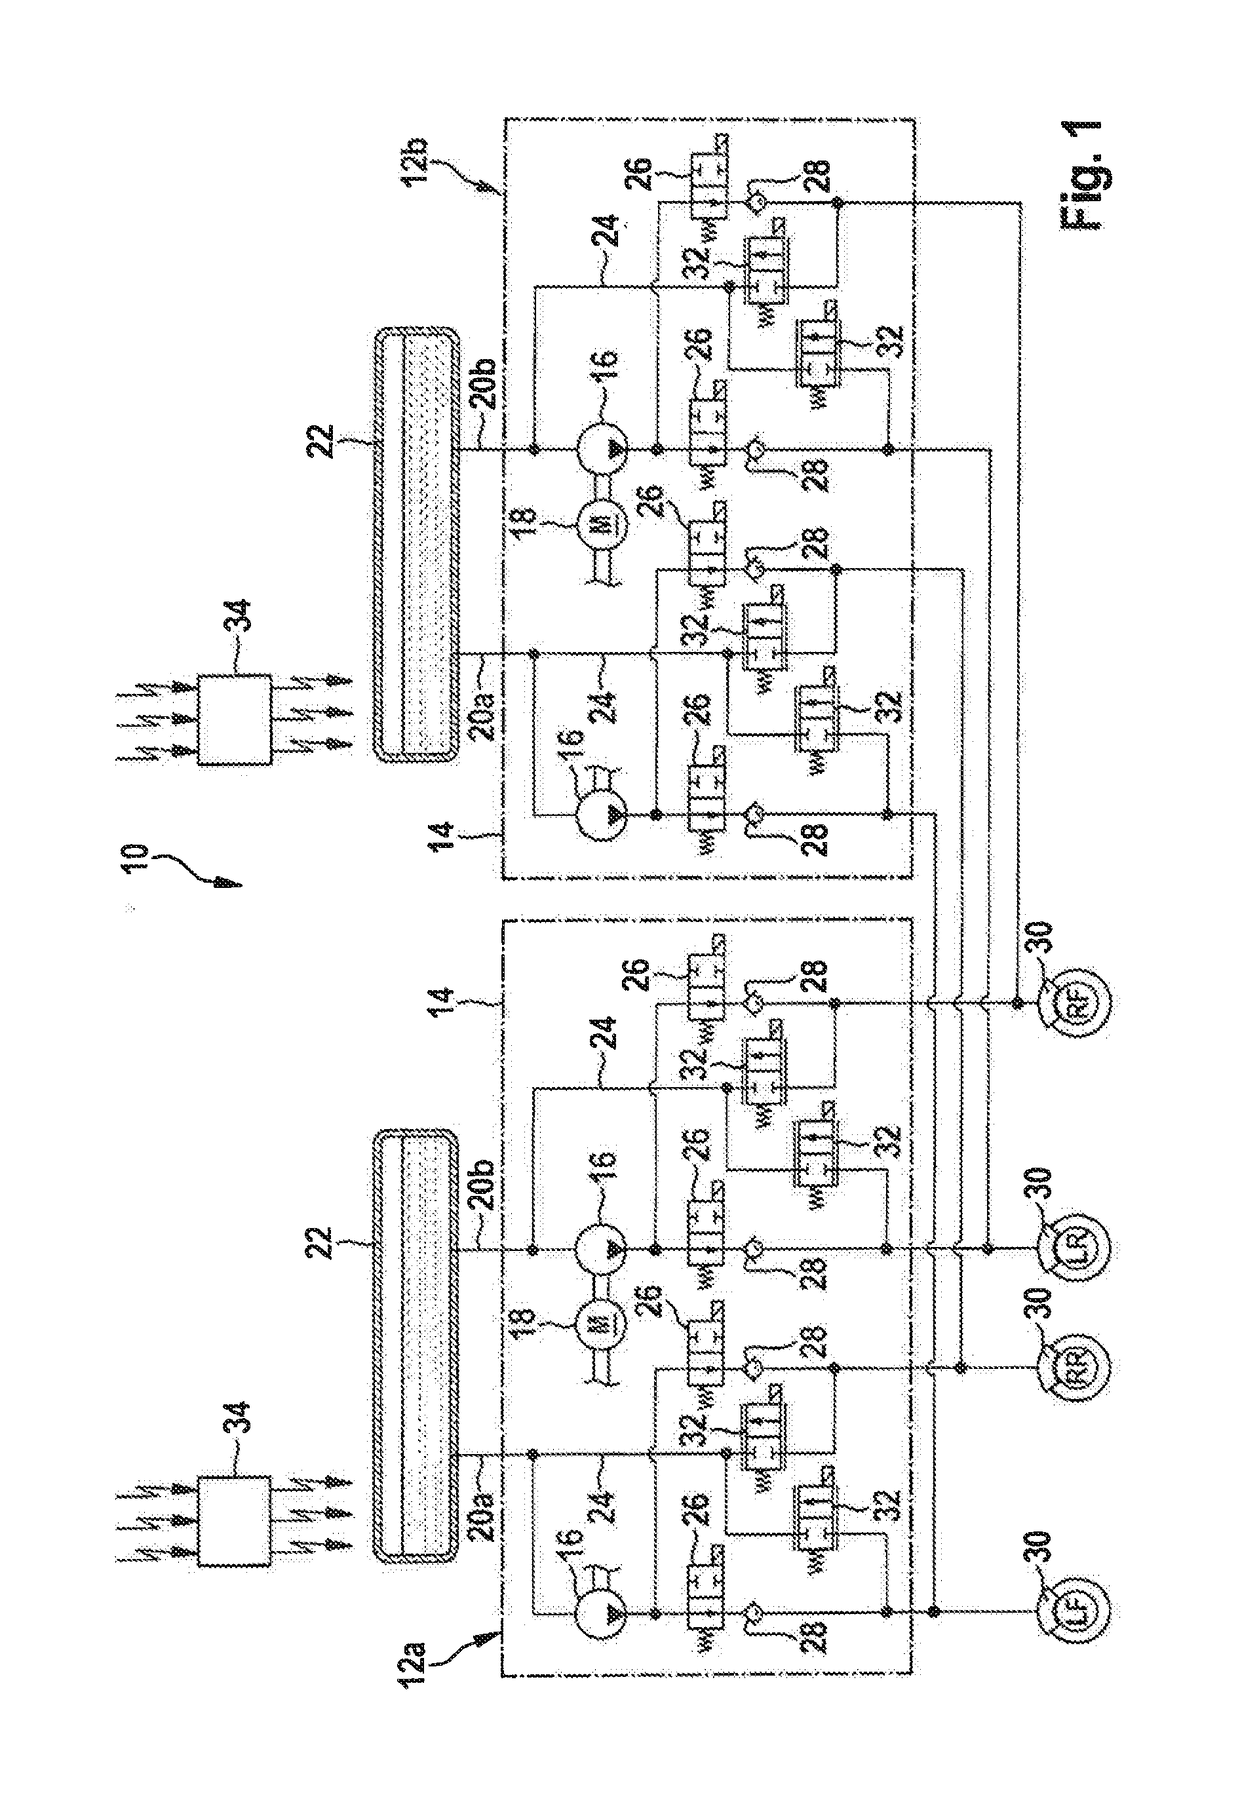 Electronically pressure-controllable braking system and methods for controlling an electronically pressure-controllable braking system